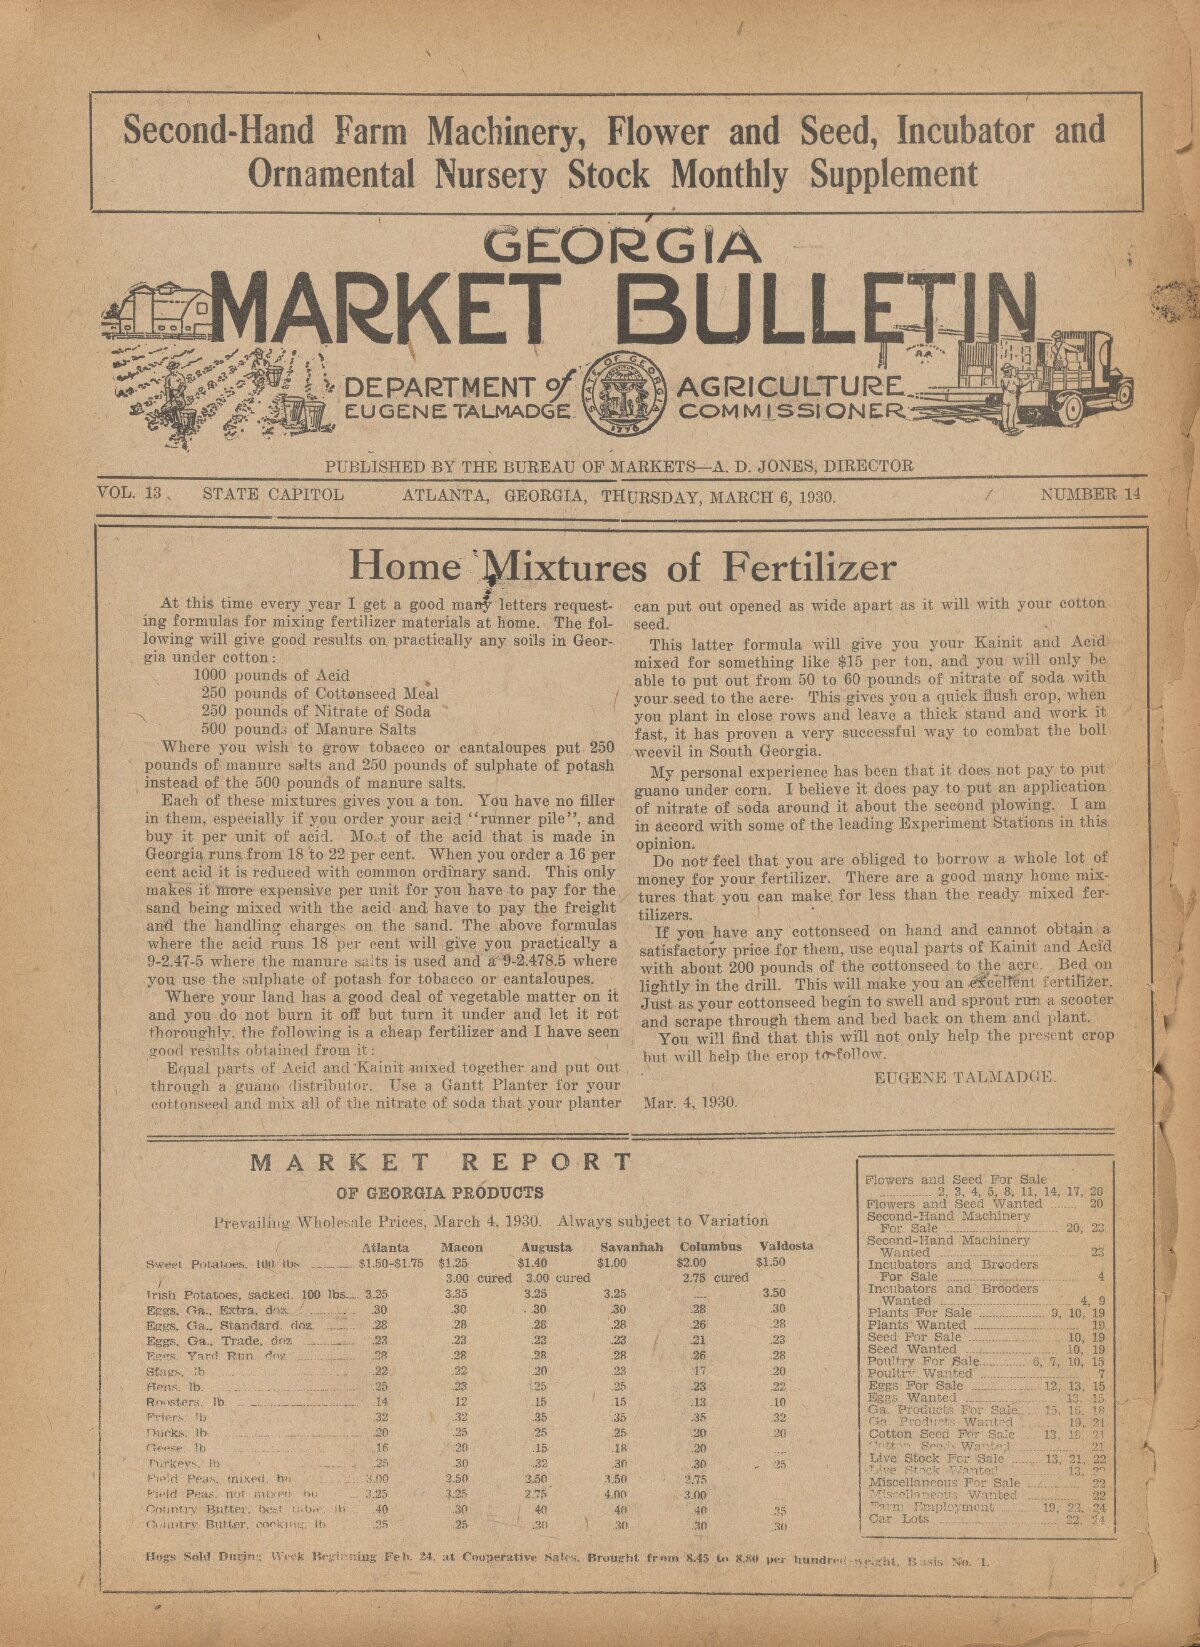 Farmers and consumers market bulletin, 1930 March 6 pic